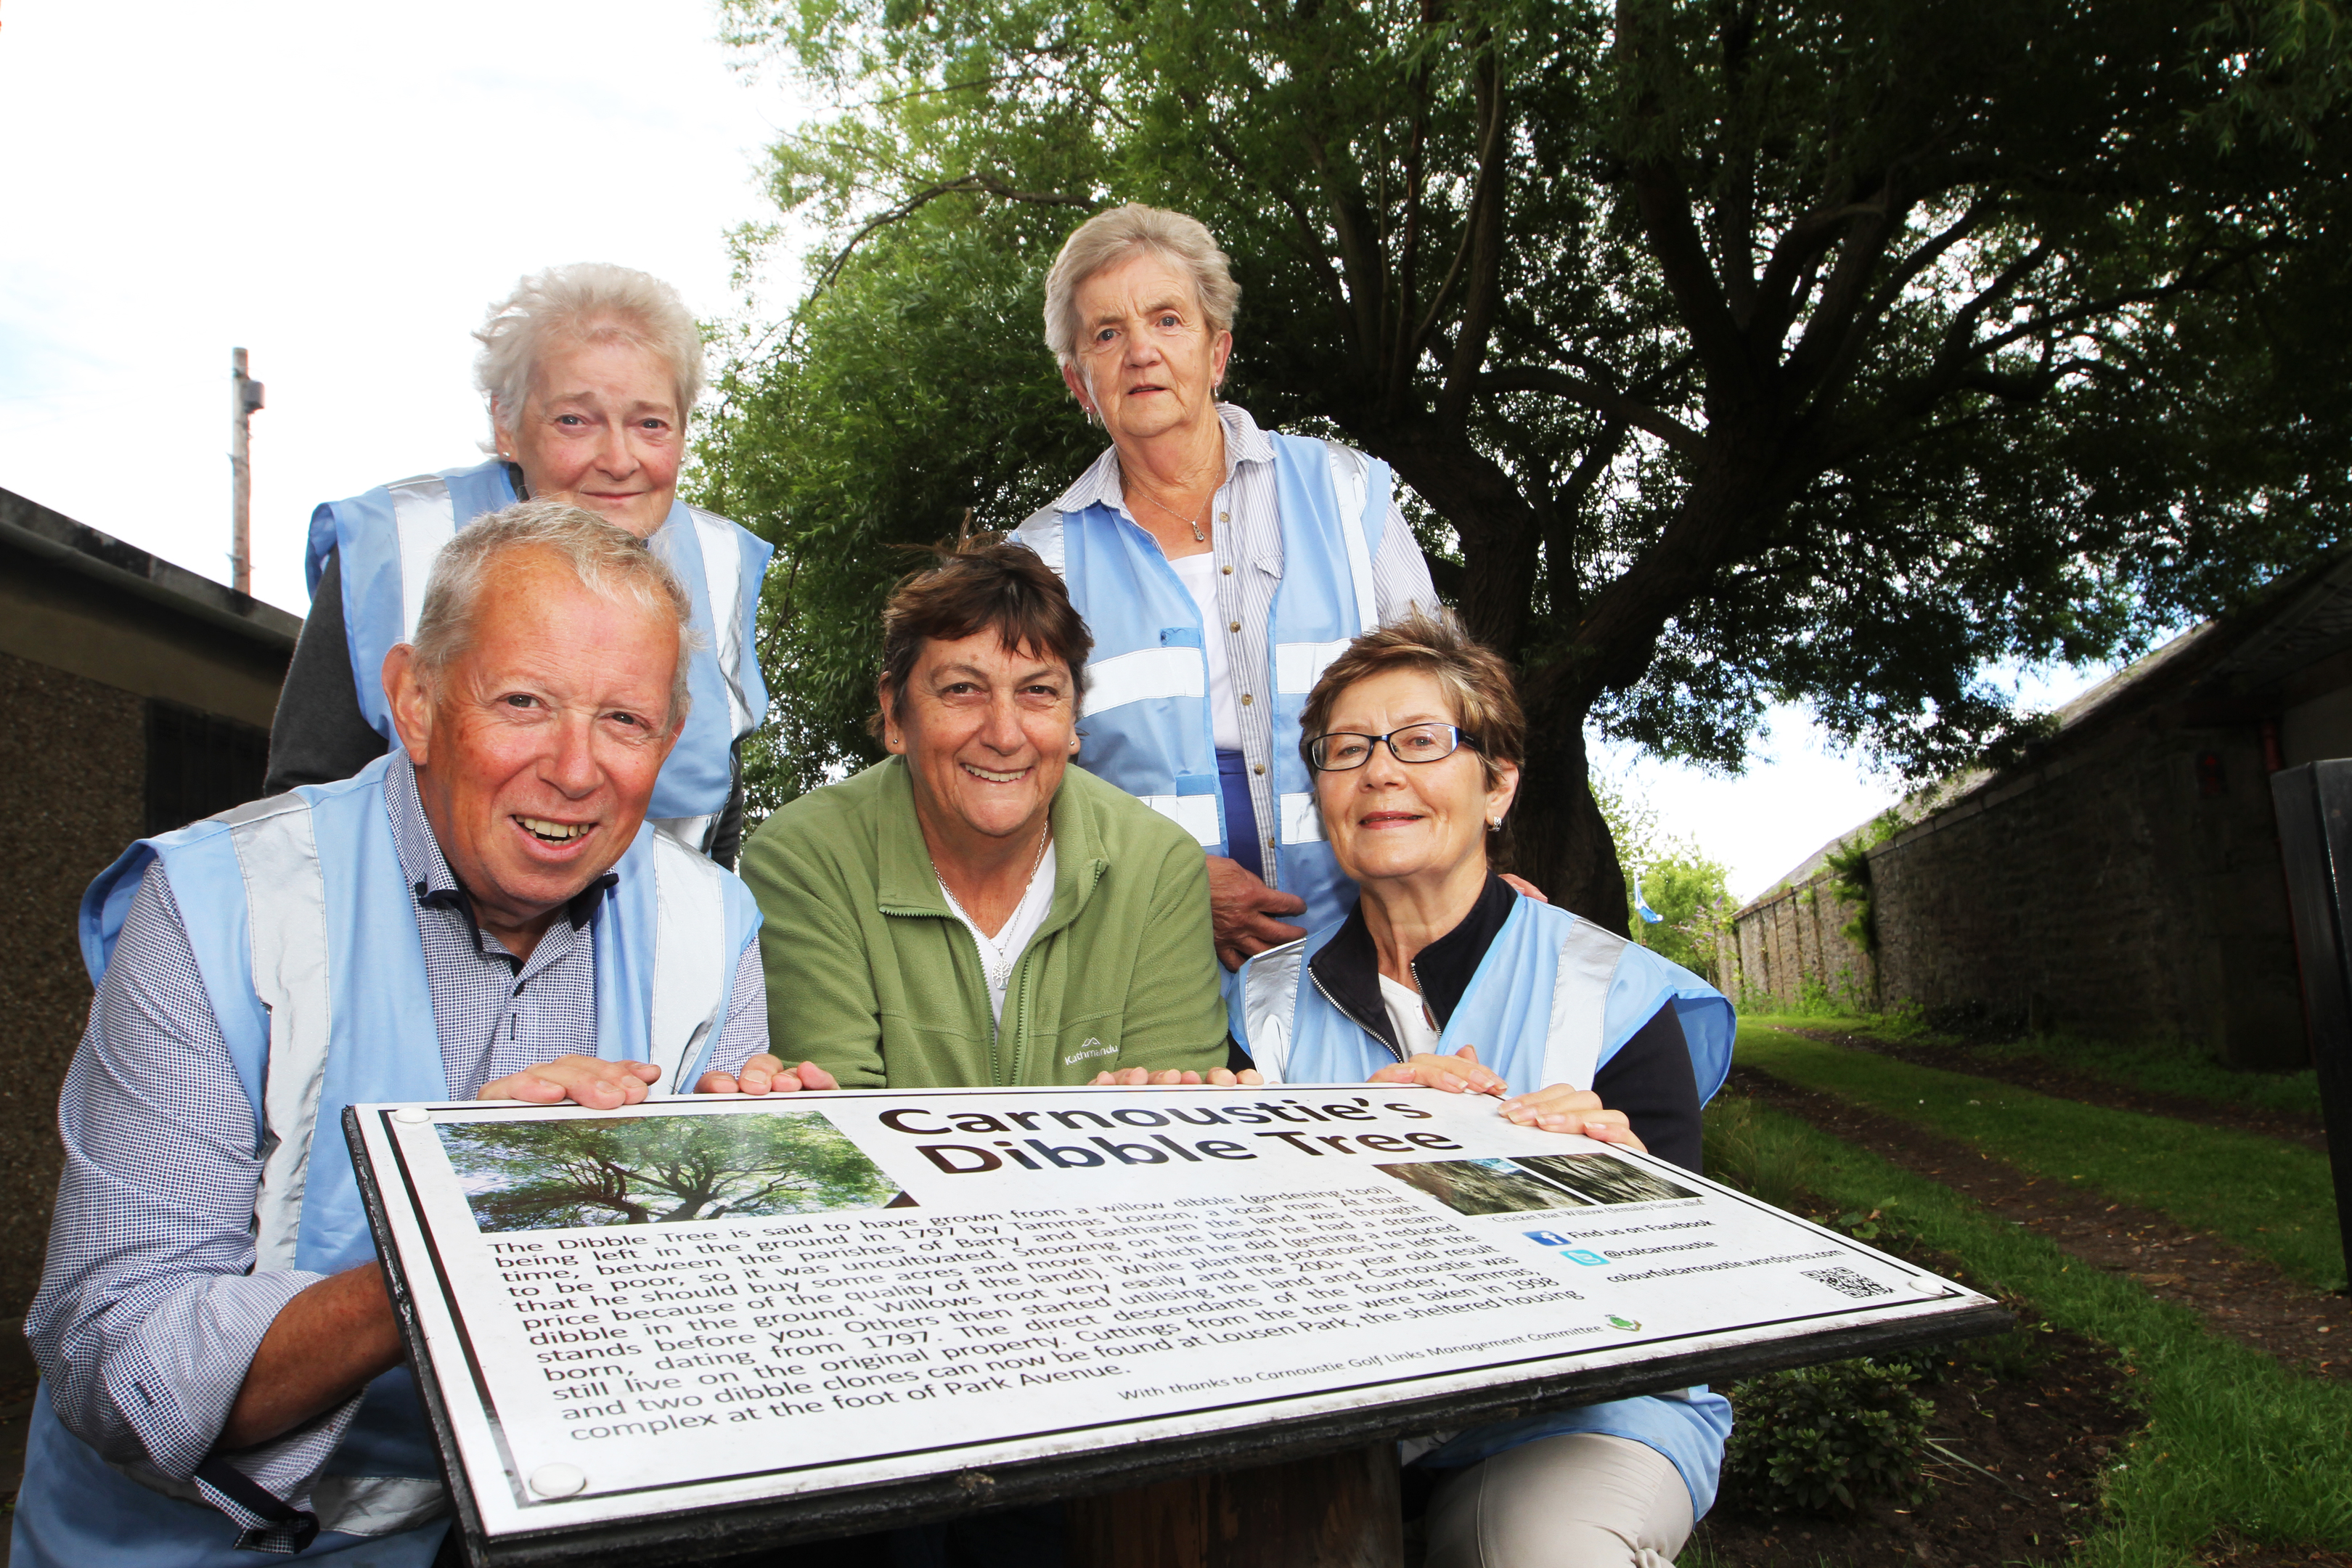 Colourful Carnoustie has carried out improvement work at the famous 220-year-old tree. Picture shows: (front l-r) Alec Edwards, Moira Lowson, Irene Donaldson, (back l-r) Kirsty MacDonald and Alice Noble.